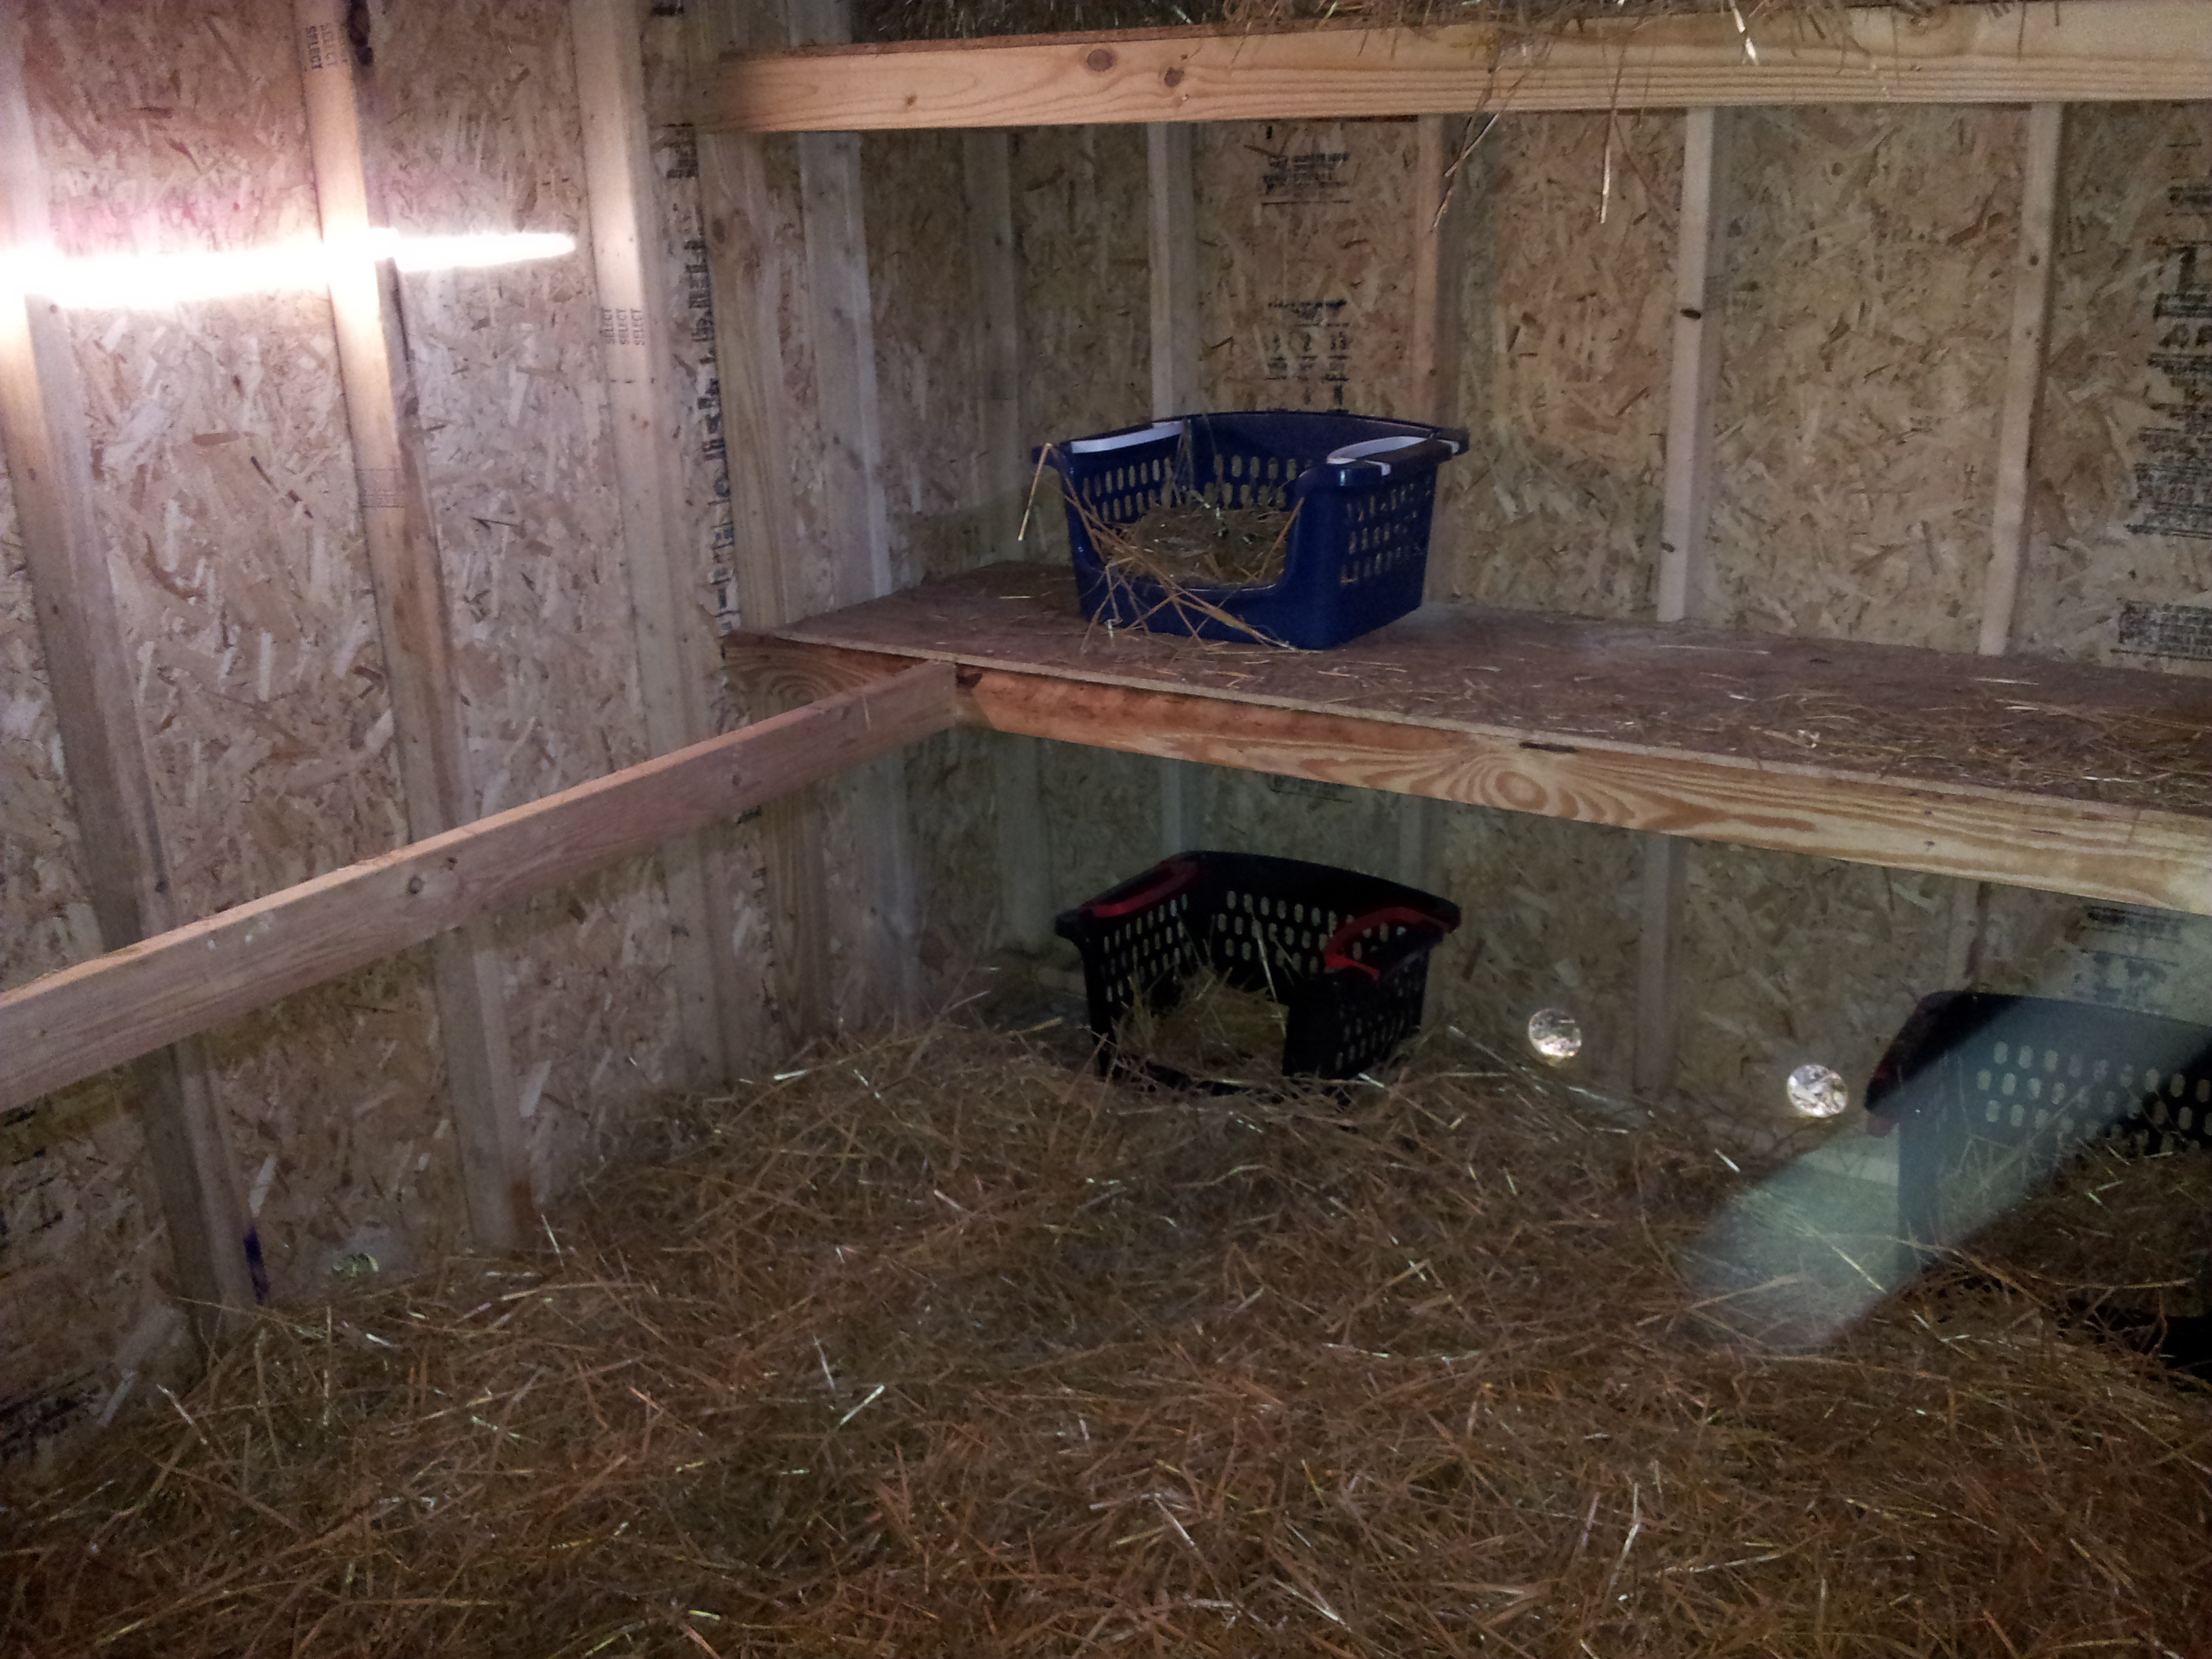 Nesting boxes put down